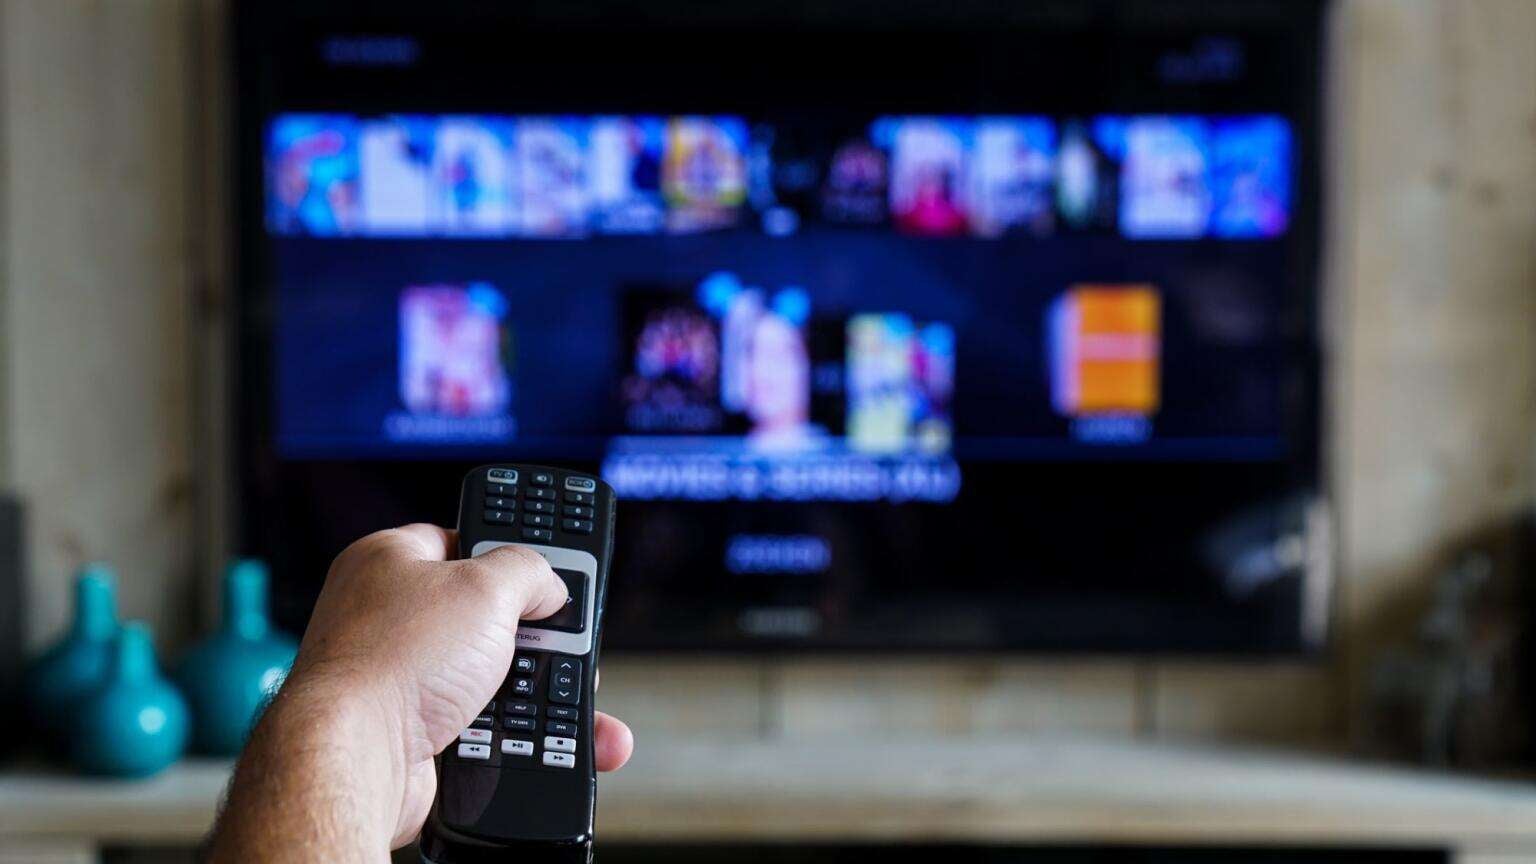 Survey: 68% of People Bought a Smart TV to Watch Streaming; Popularity Continues to Rise